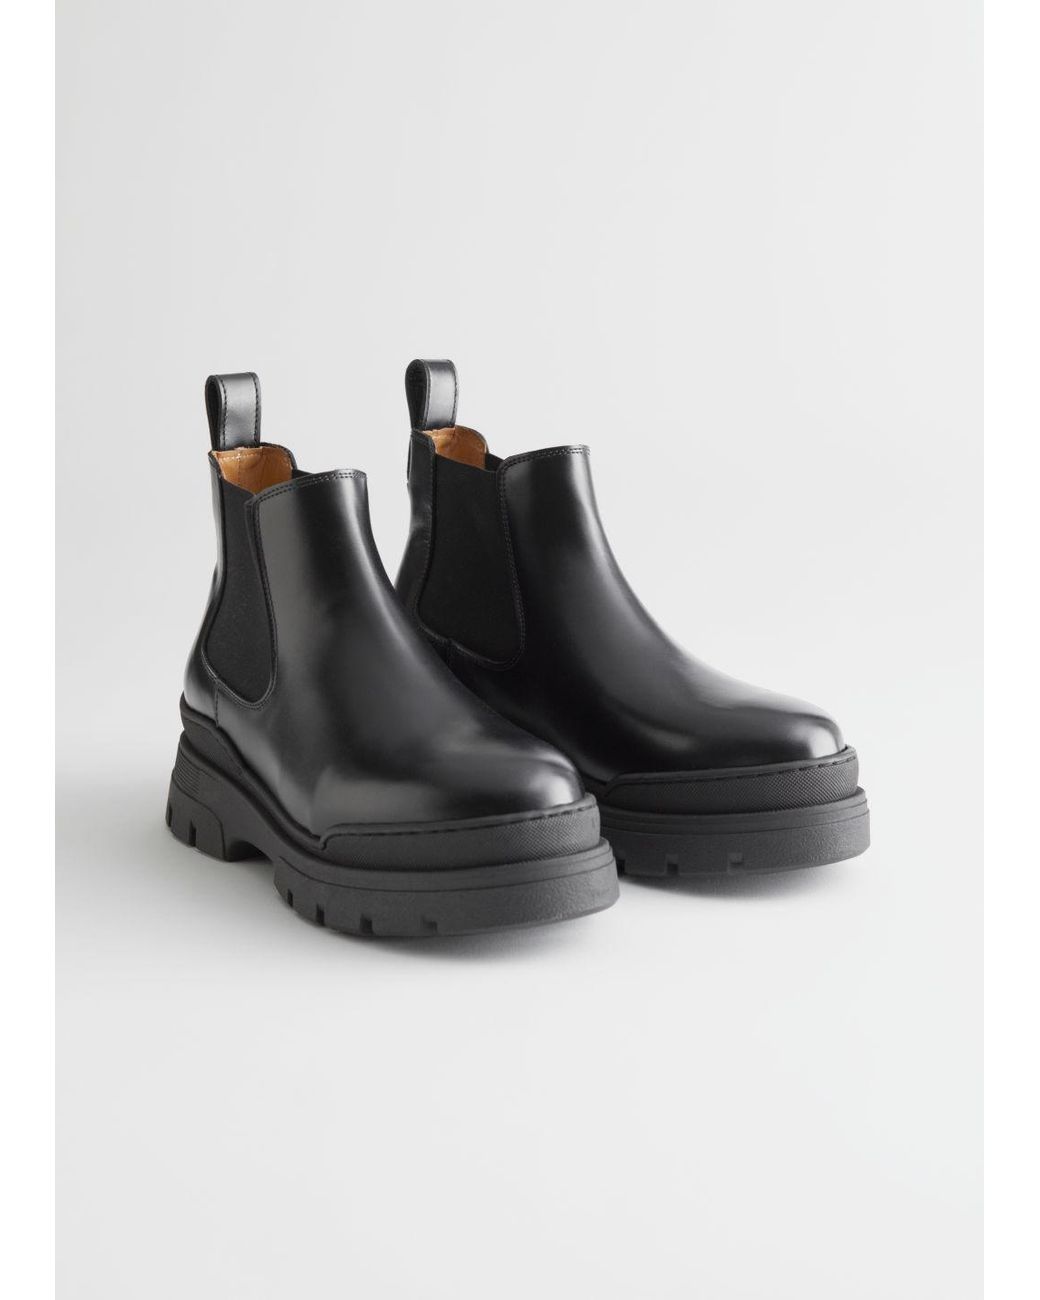 & Other Stories Chunky Leather Chelsea Boots in Black - Lyst